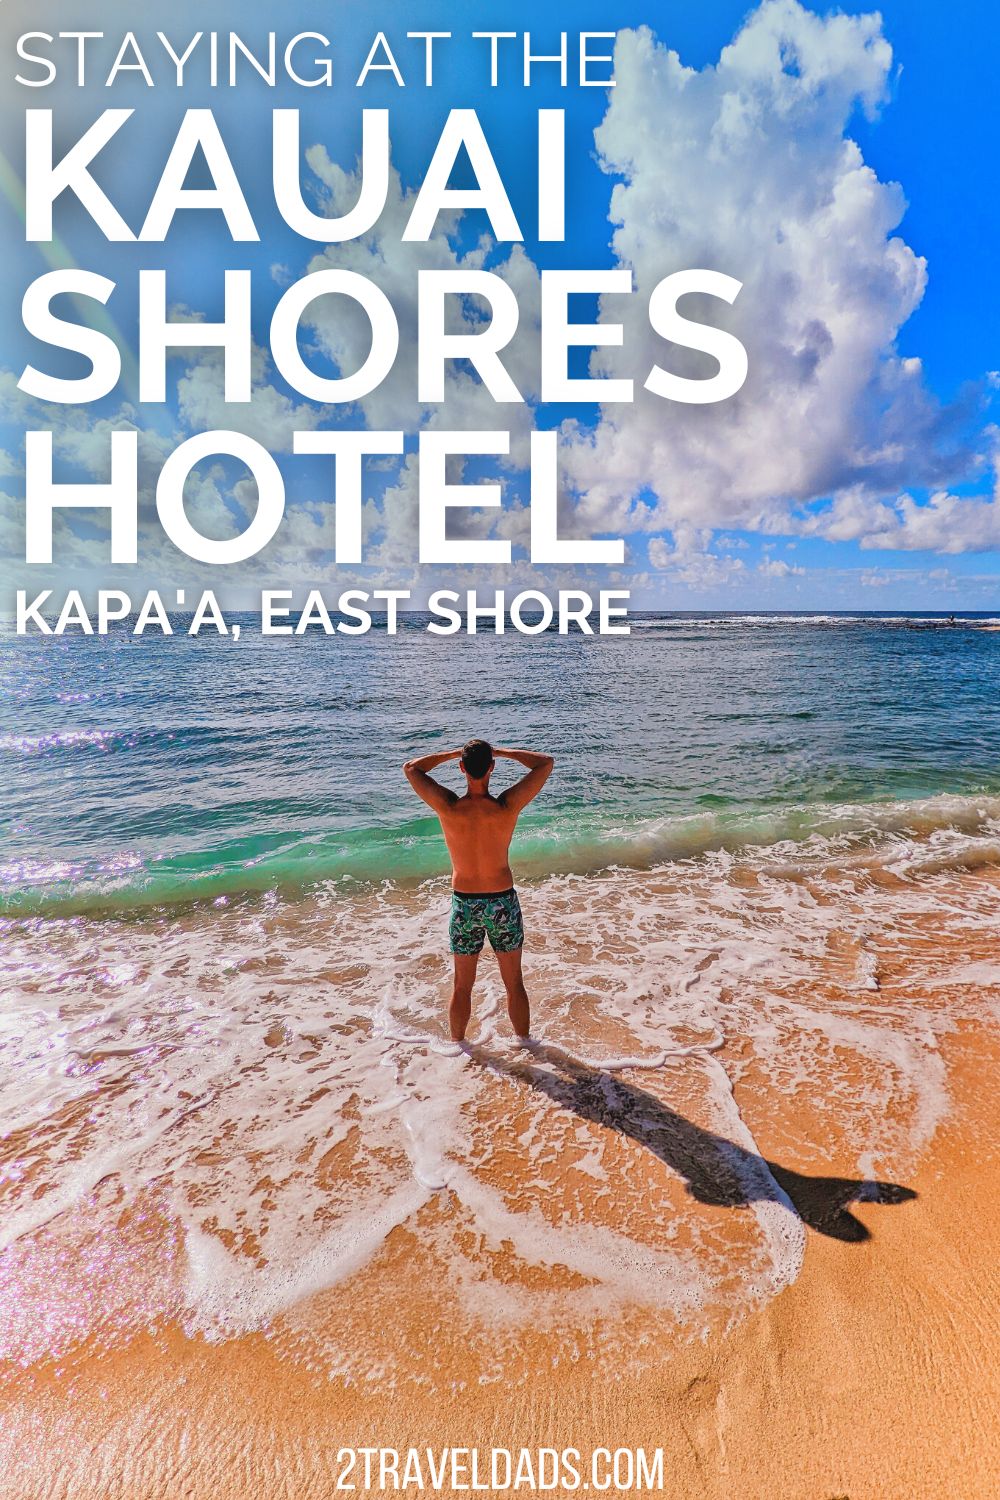 Review of the Kauai Shores Hotel in Kapa'a on the East Shore of Kauai. See what we loved about staying here and what we wish was different. Plus, ideas for things to do on a trip to Kauai.